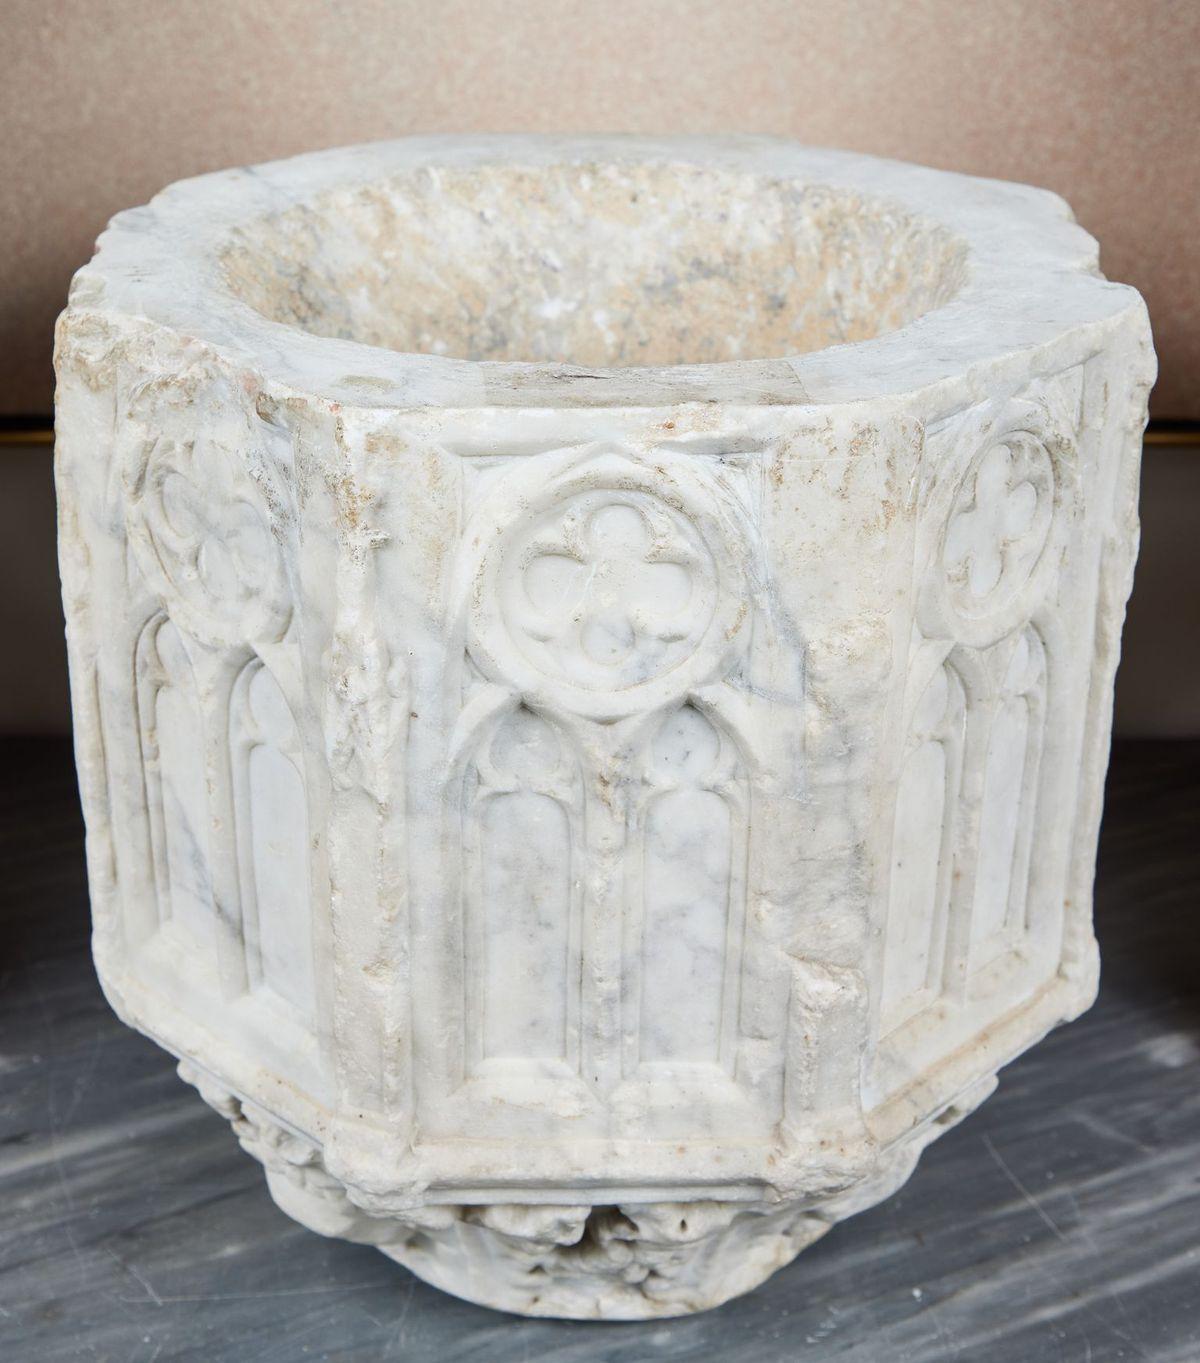 Absolutely stunning, period, hand-carved solid marble downspout featuring a 360 degree series of reliefs depicting iconic, arched Gothic windows surmounted by quatrefoil medallions. The whole on a tapered base of foliate relief carvings.